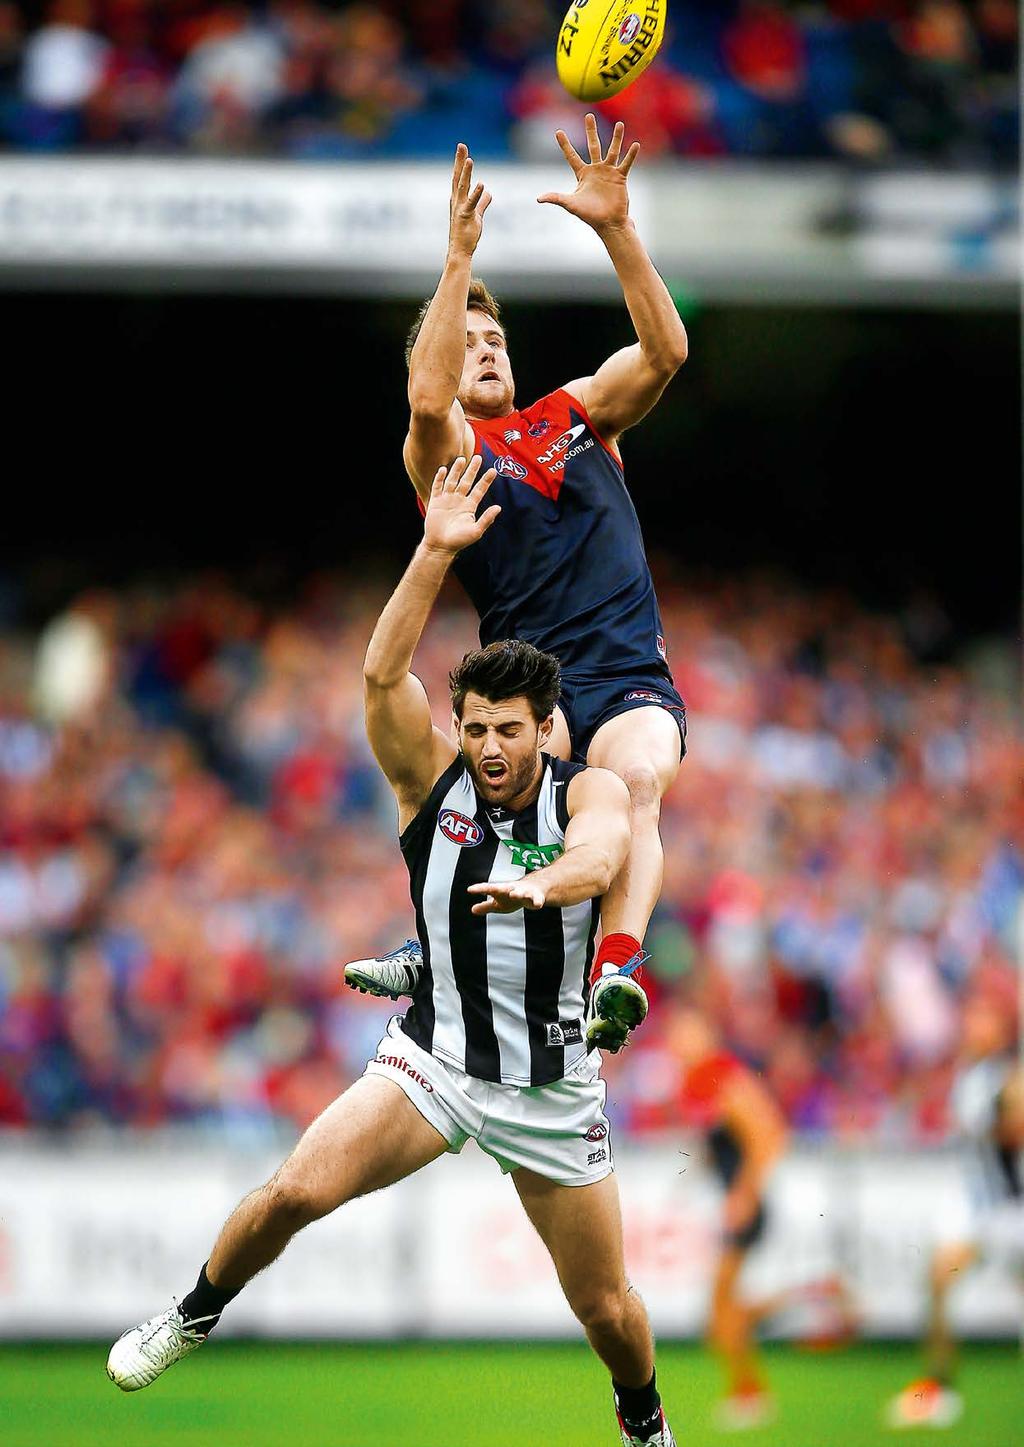 22 AFL ANNUAL REPORT 2014 CHAIRMAN'S REPORT 23 COMPETITIVE BALANCE EVERY TEAM, EVERY CHANCE HIGH HOPES Demon Jeremy Howe soars over Magpie Alex Fasolo in the Queen s Birthday blockbuster.